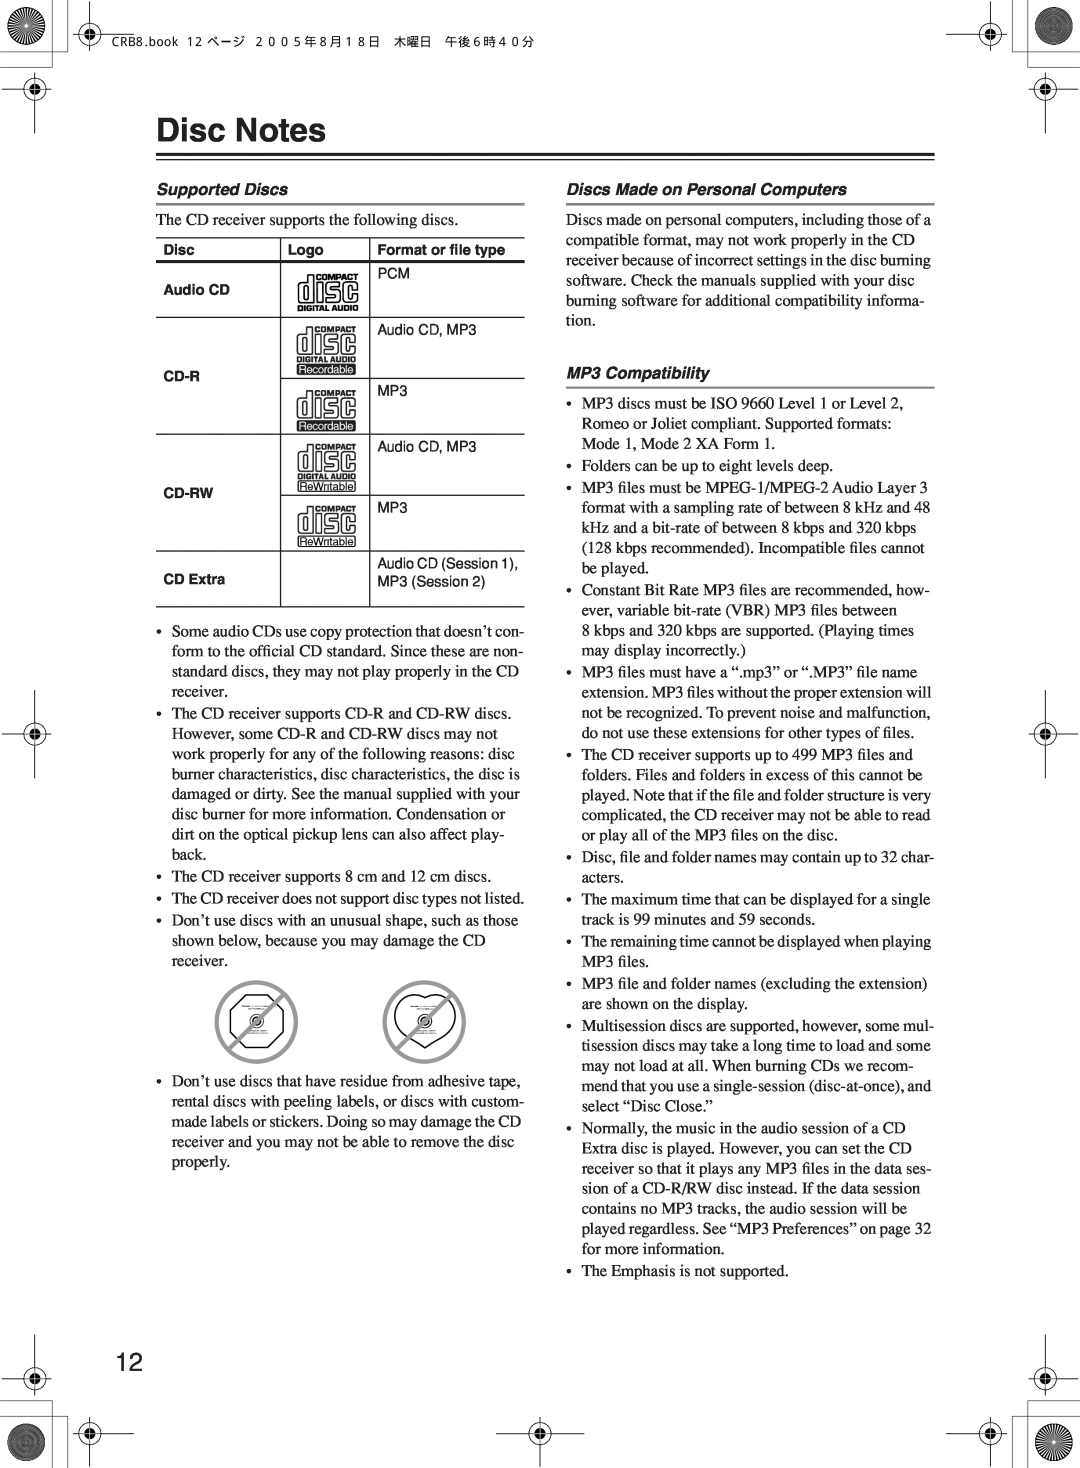 Onkyo CR-B8 instruction manual Disc Notes, Supported Discs, Discs Made on Personal Computers, MP3 Compatibility 